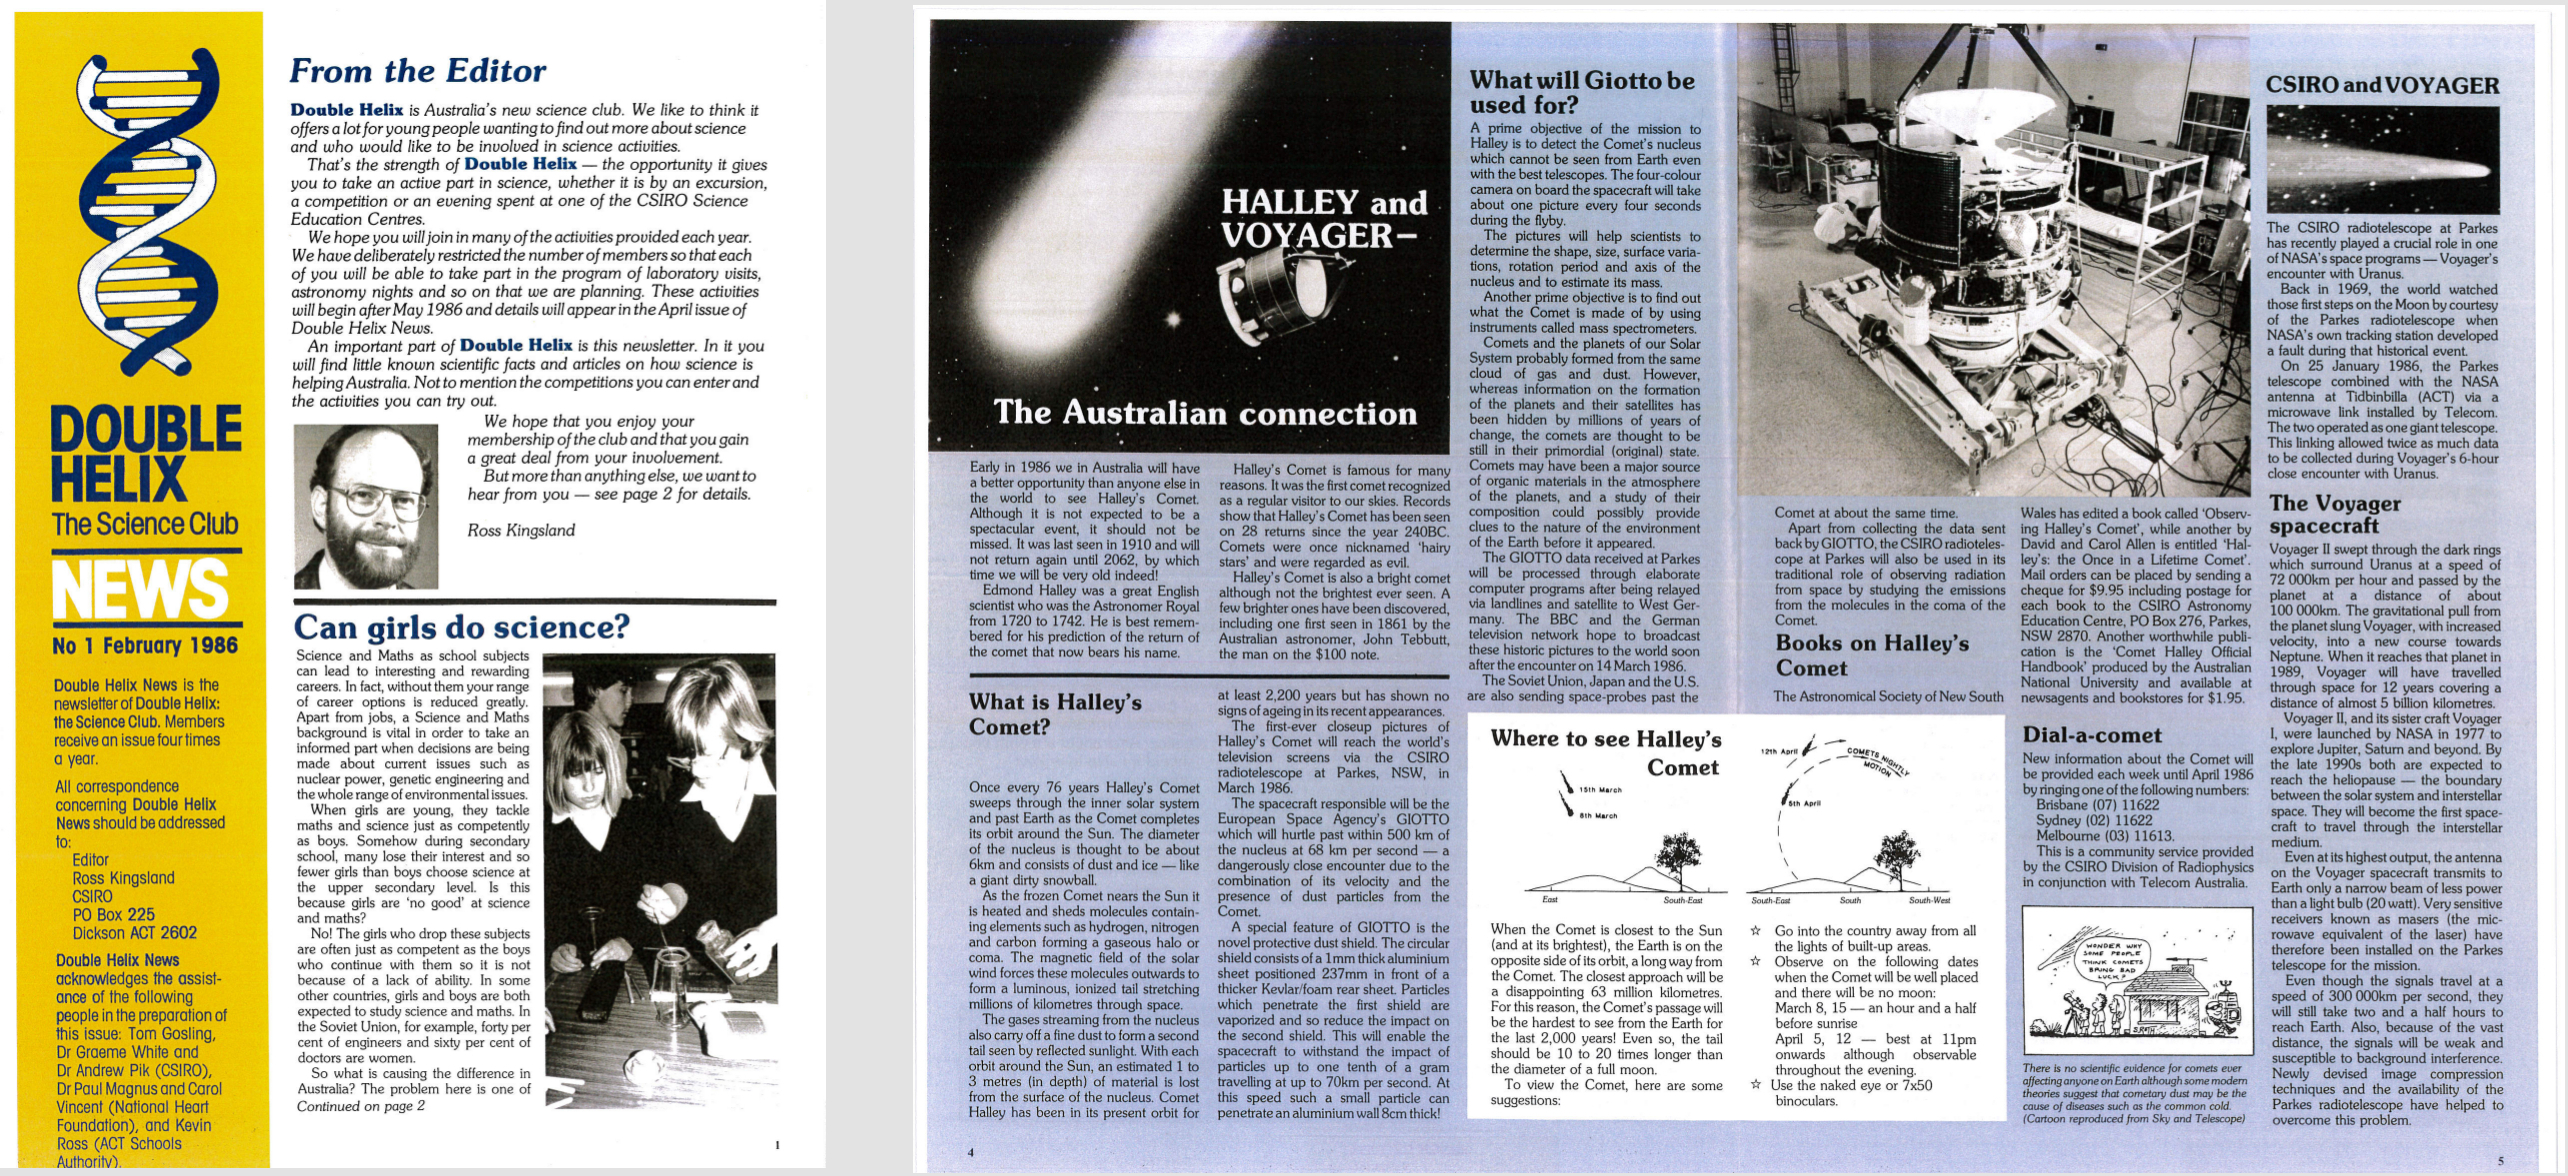 First edition of the Double Helix newsletter from 1986